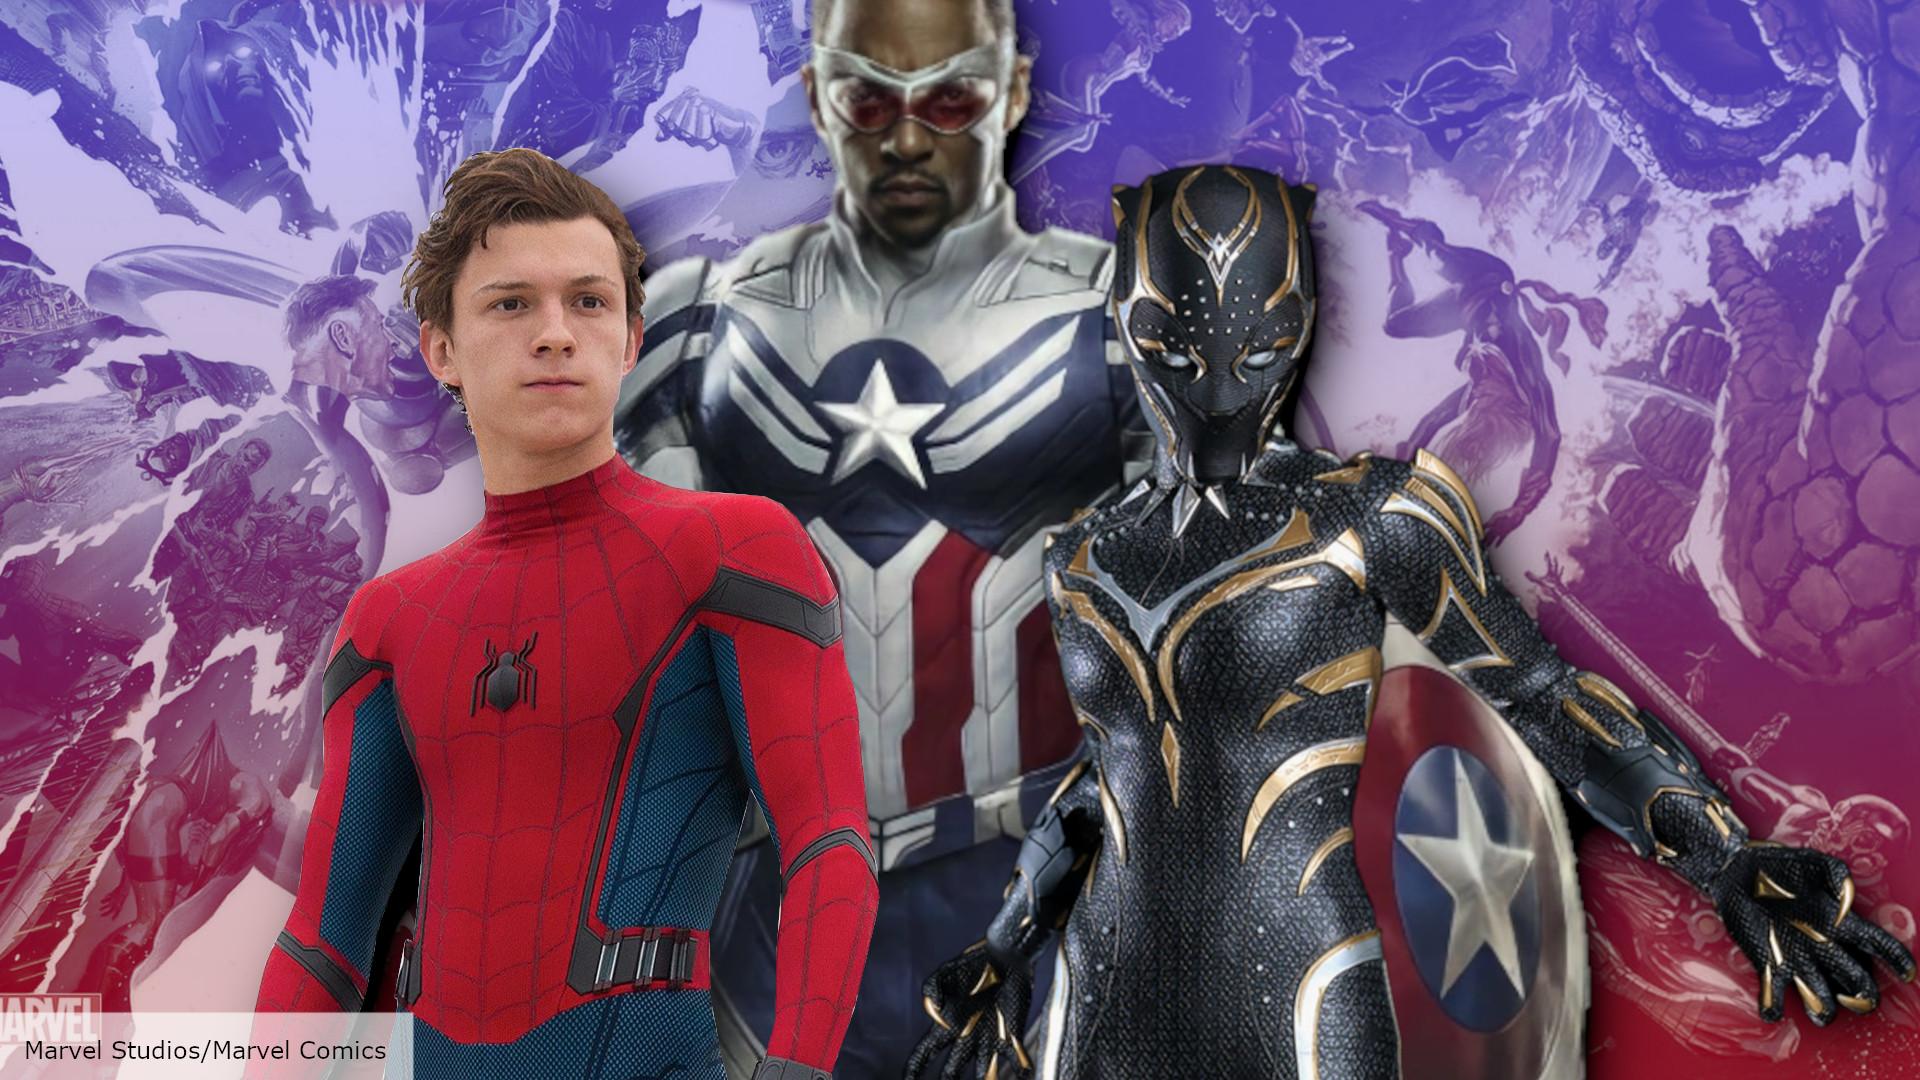 Avengers: Secret Wars: Release date, what to expect, leaks and more